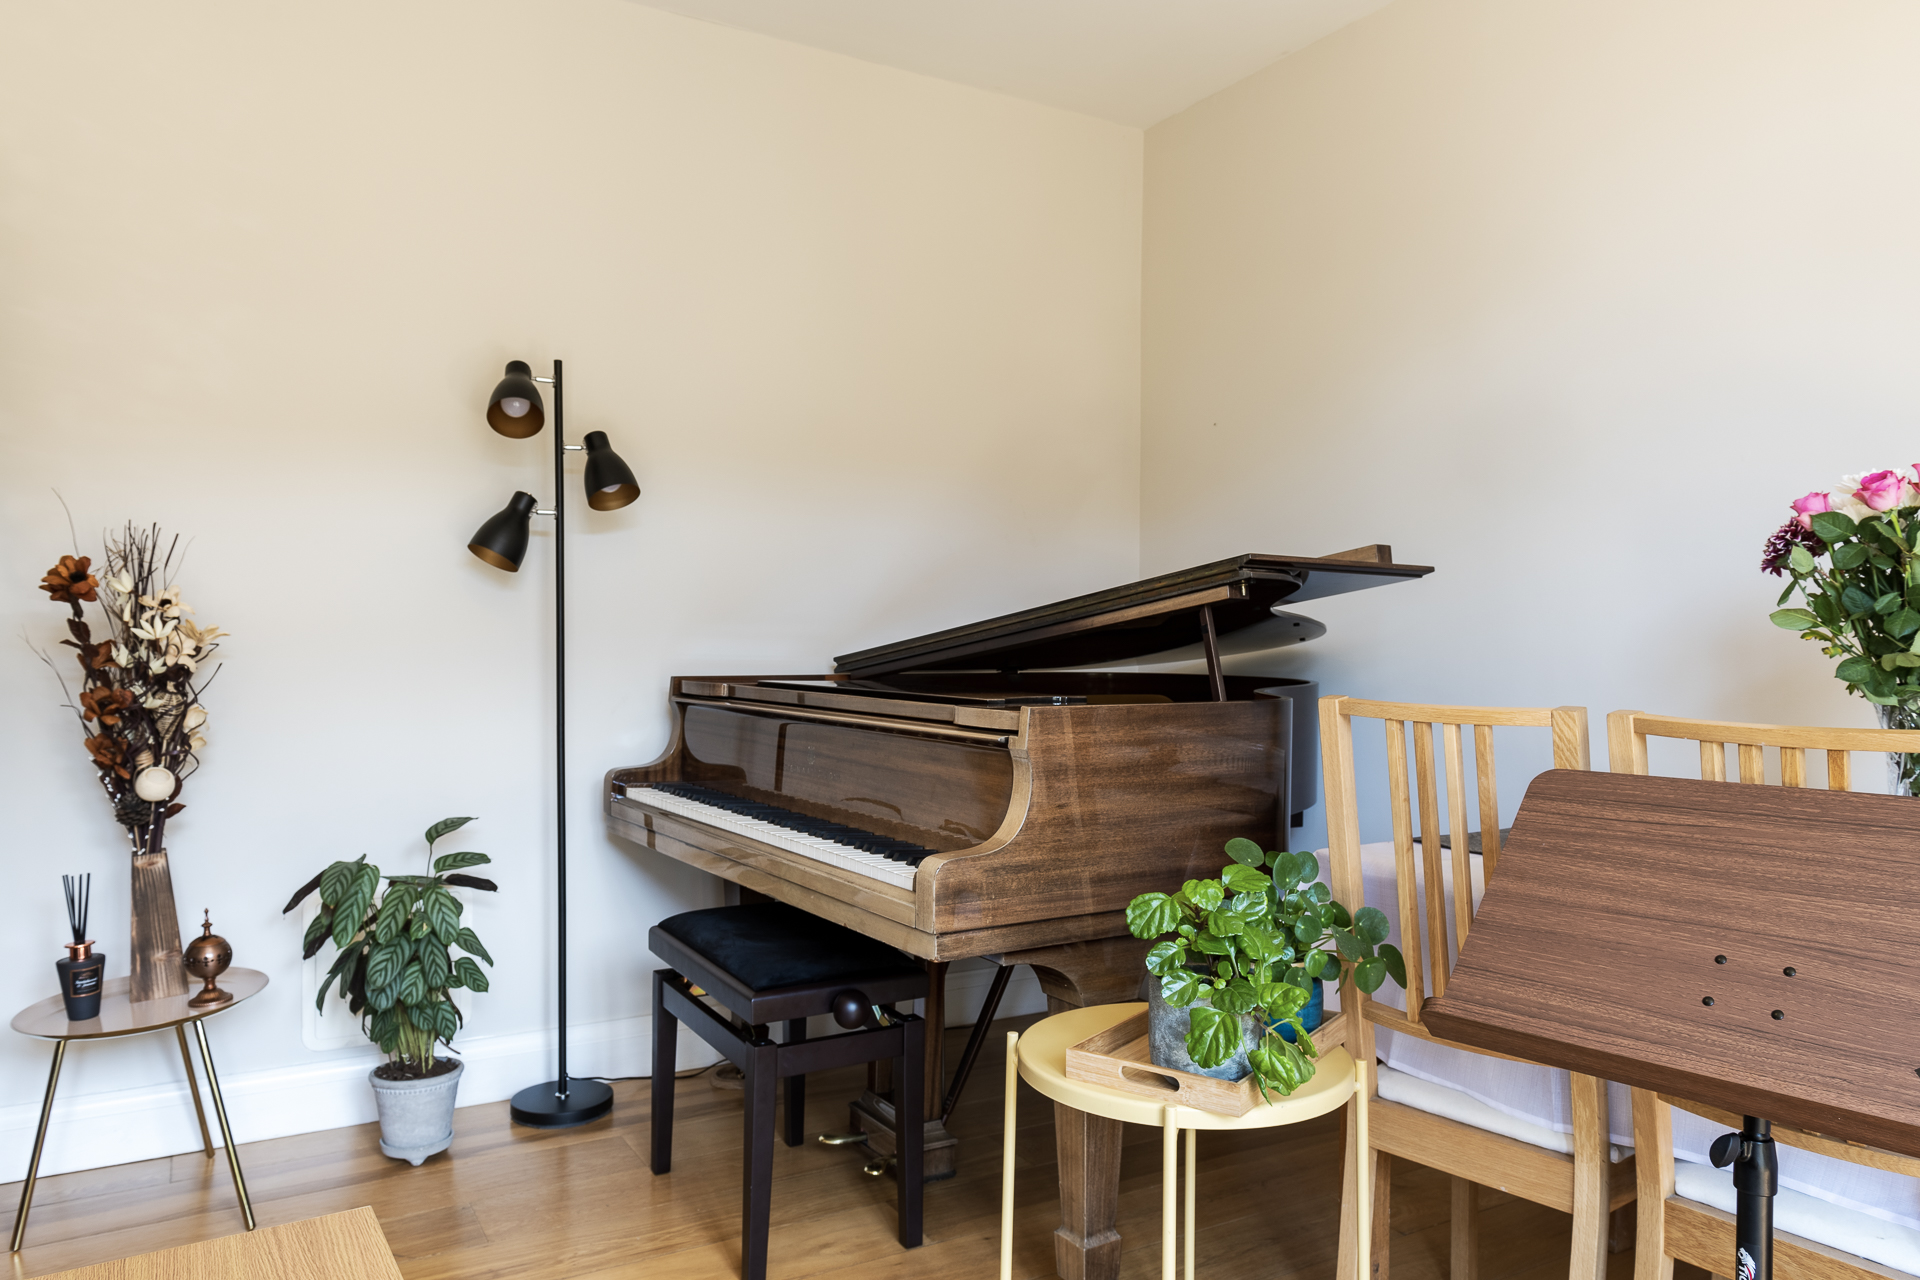 Cristina offers free music lessons and practice space through our scheme.